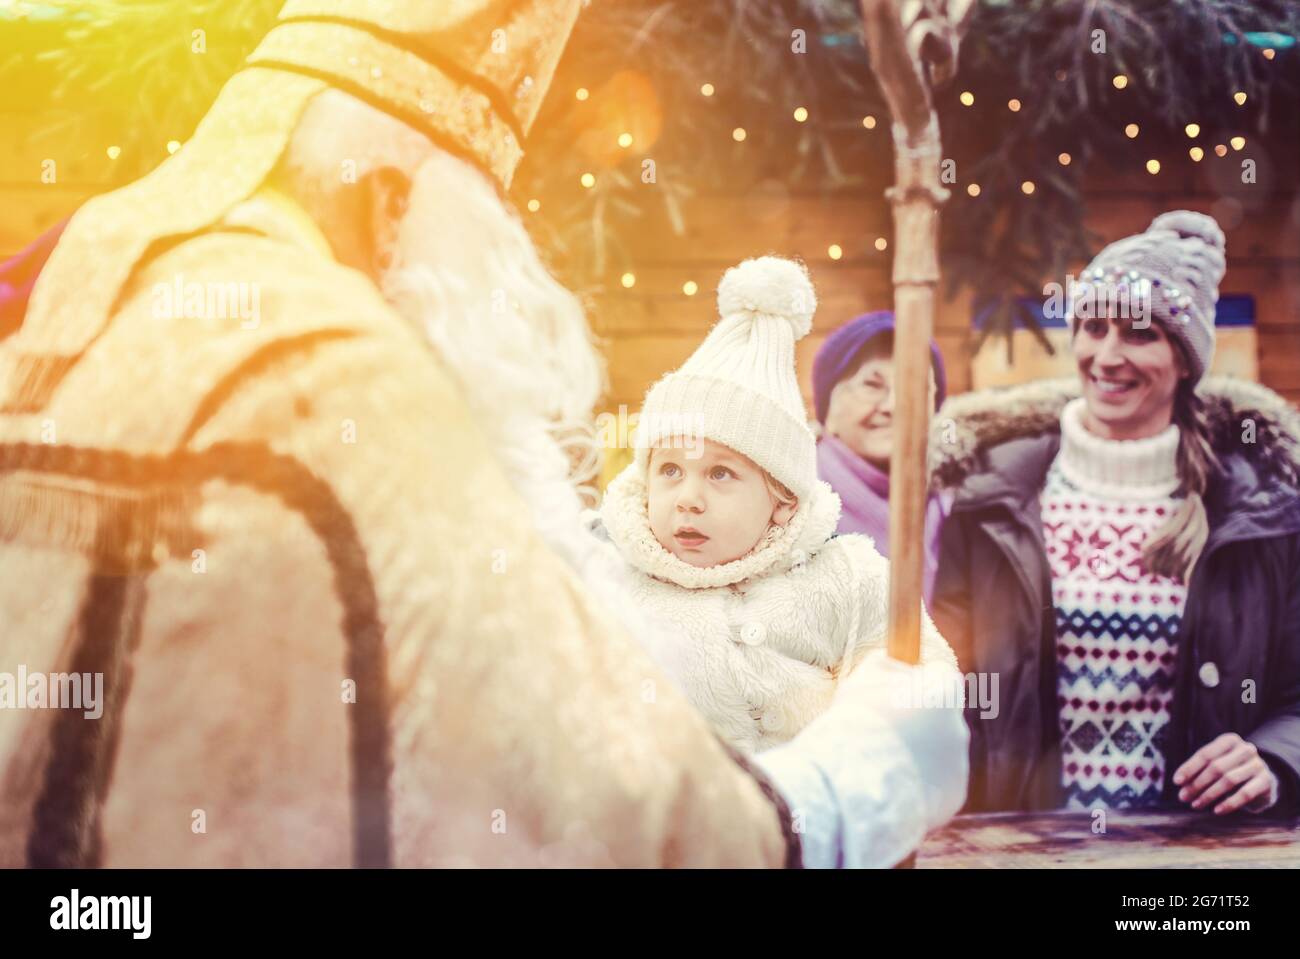 St Nicholas and an extended family with child on the Christmas market Stock Photo